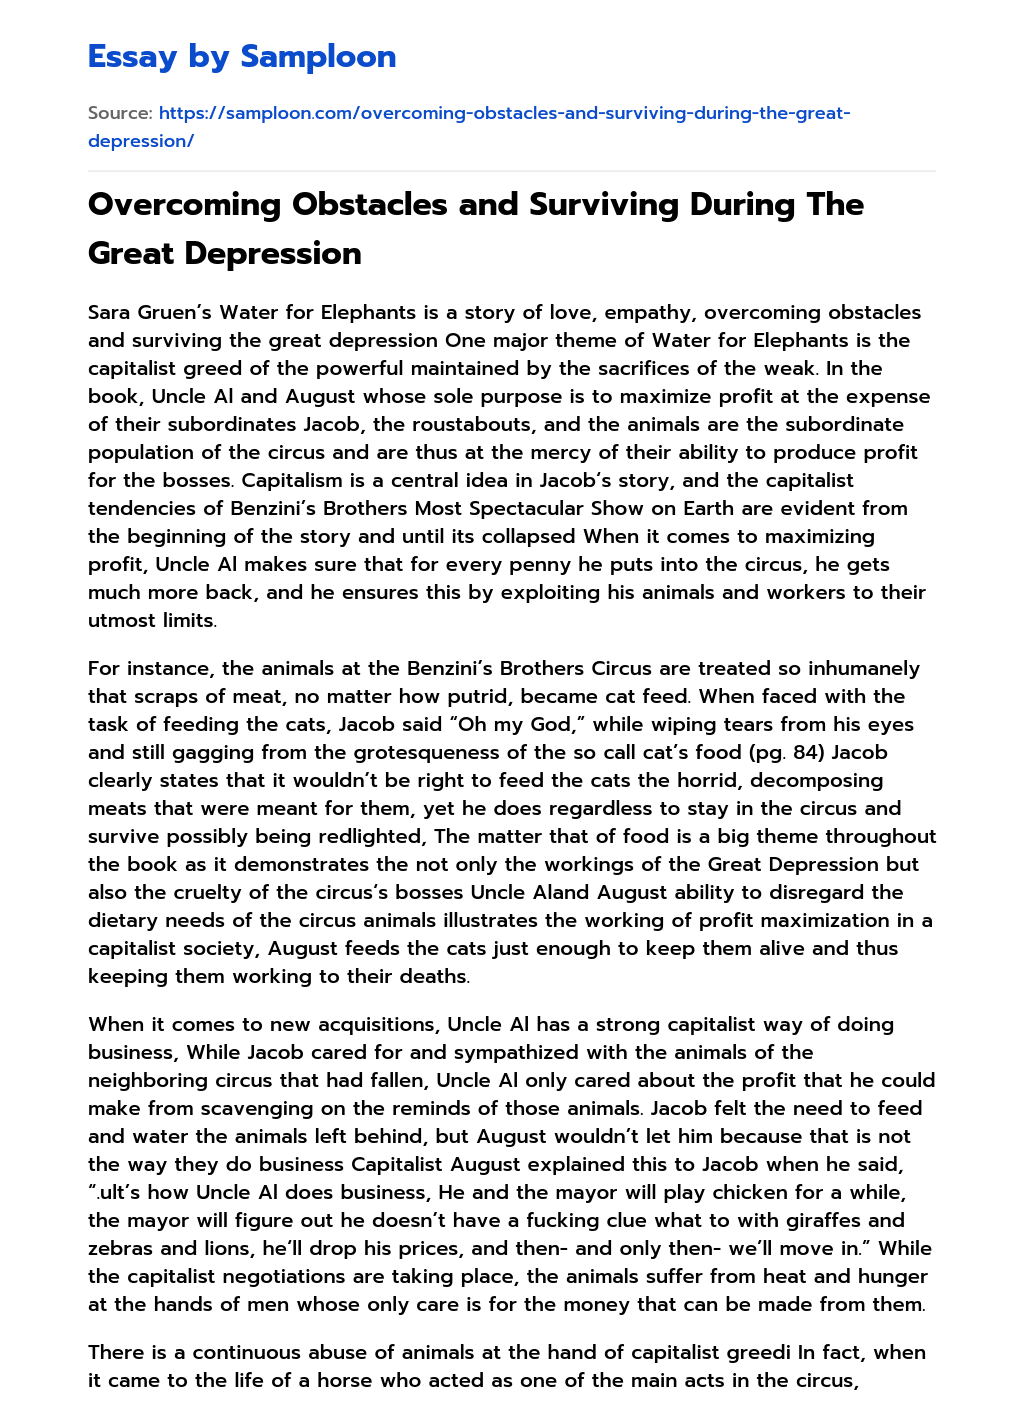 Overcoming Obstacles and Surviving During The Great Depression essay